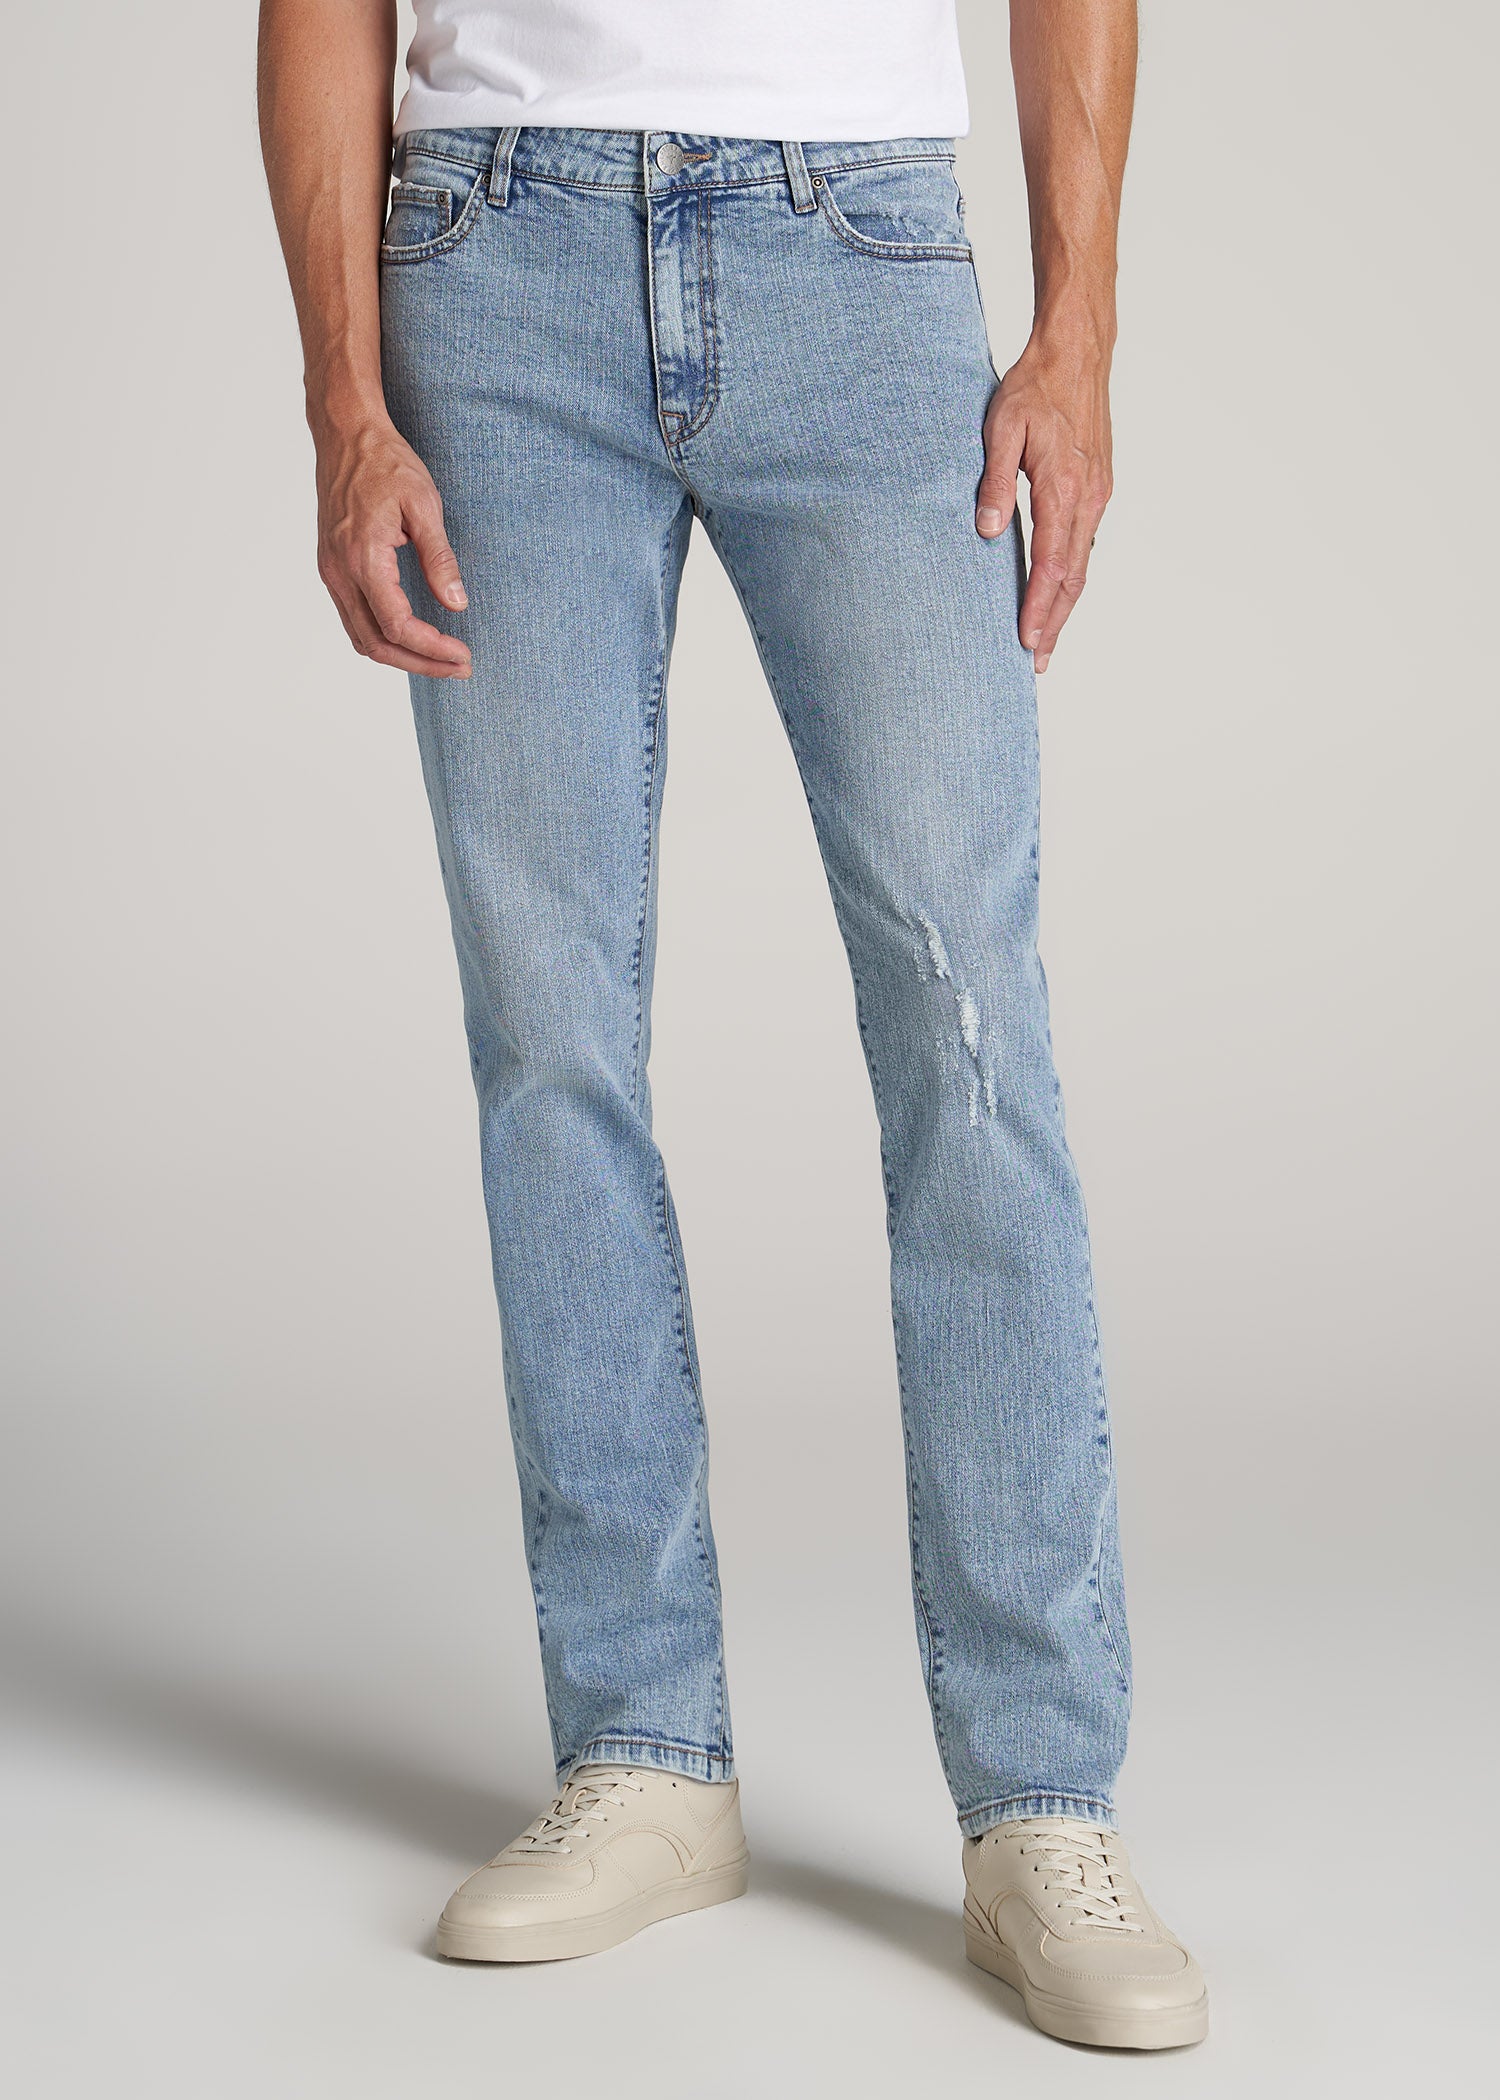 Dylan SLIM-FIT Jeans for Tall Men in Retro Blue